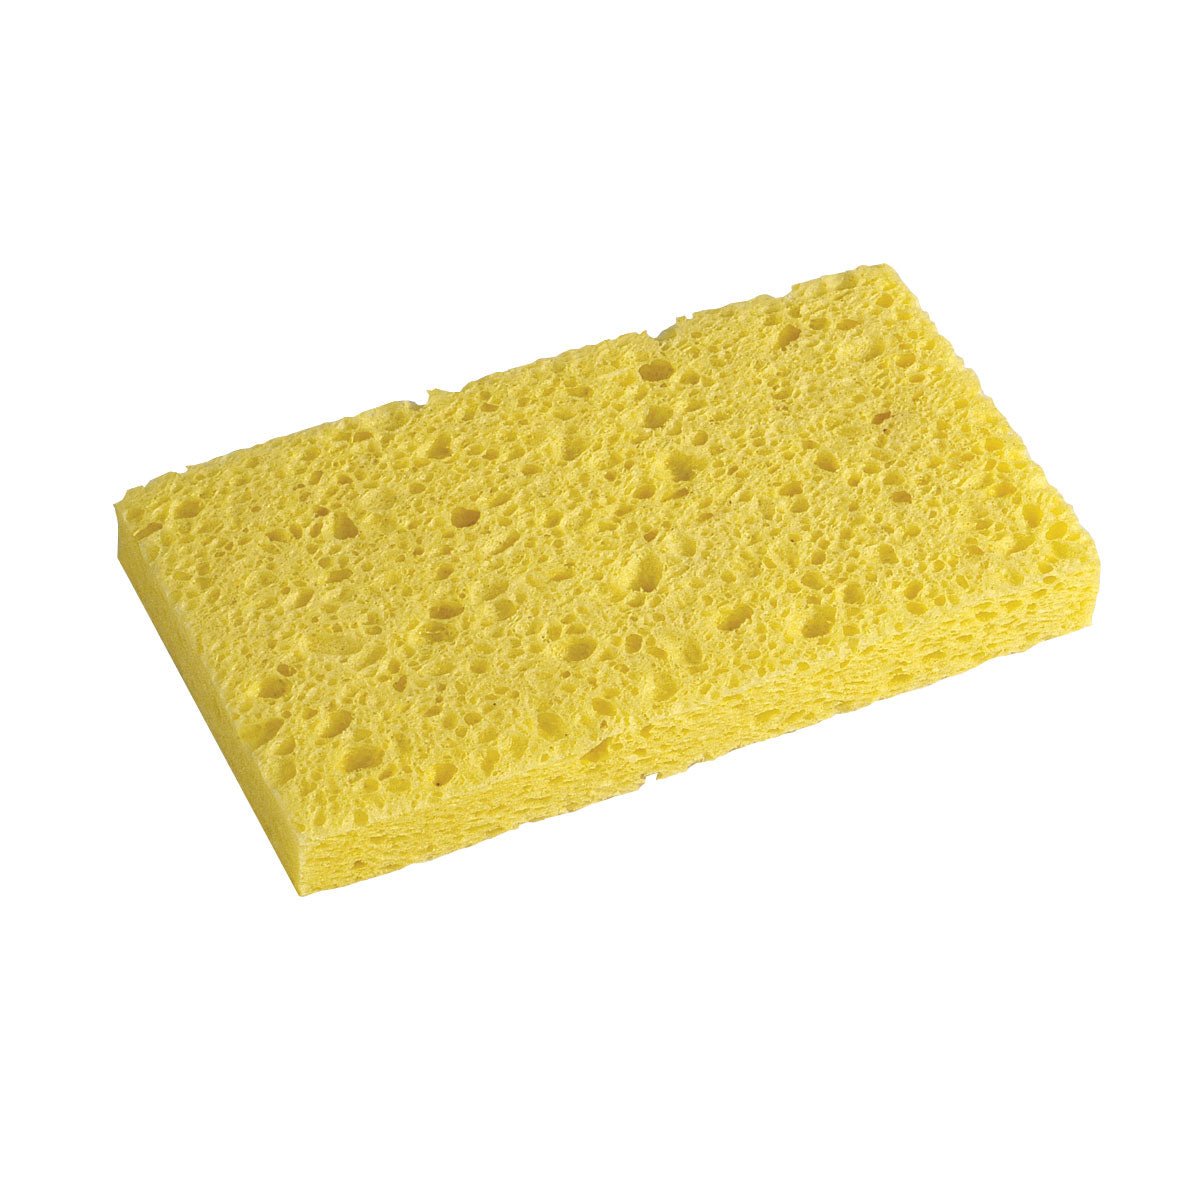 Replacement Sponge for MIcro - Mark Variable Temperature Soldering Station #84383 (3 pk) - Micro - Mark Soldering Iron Tips